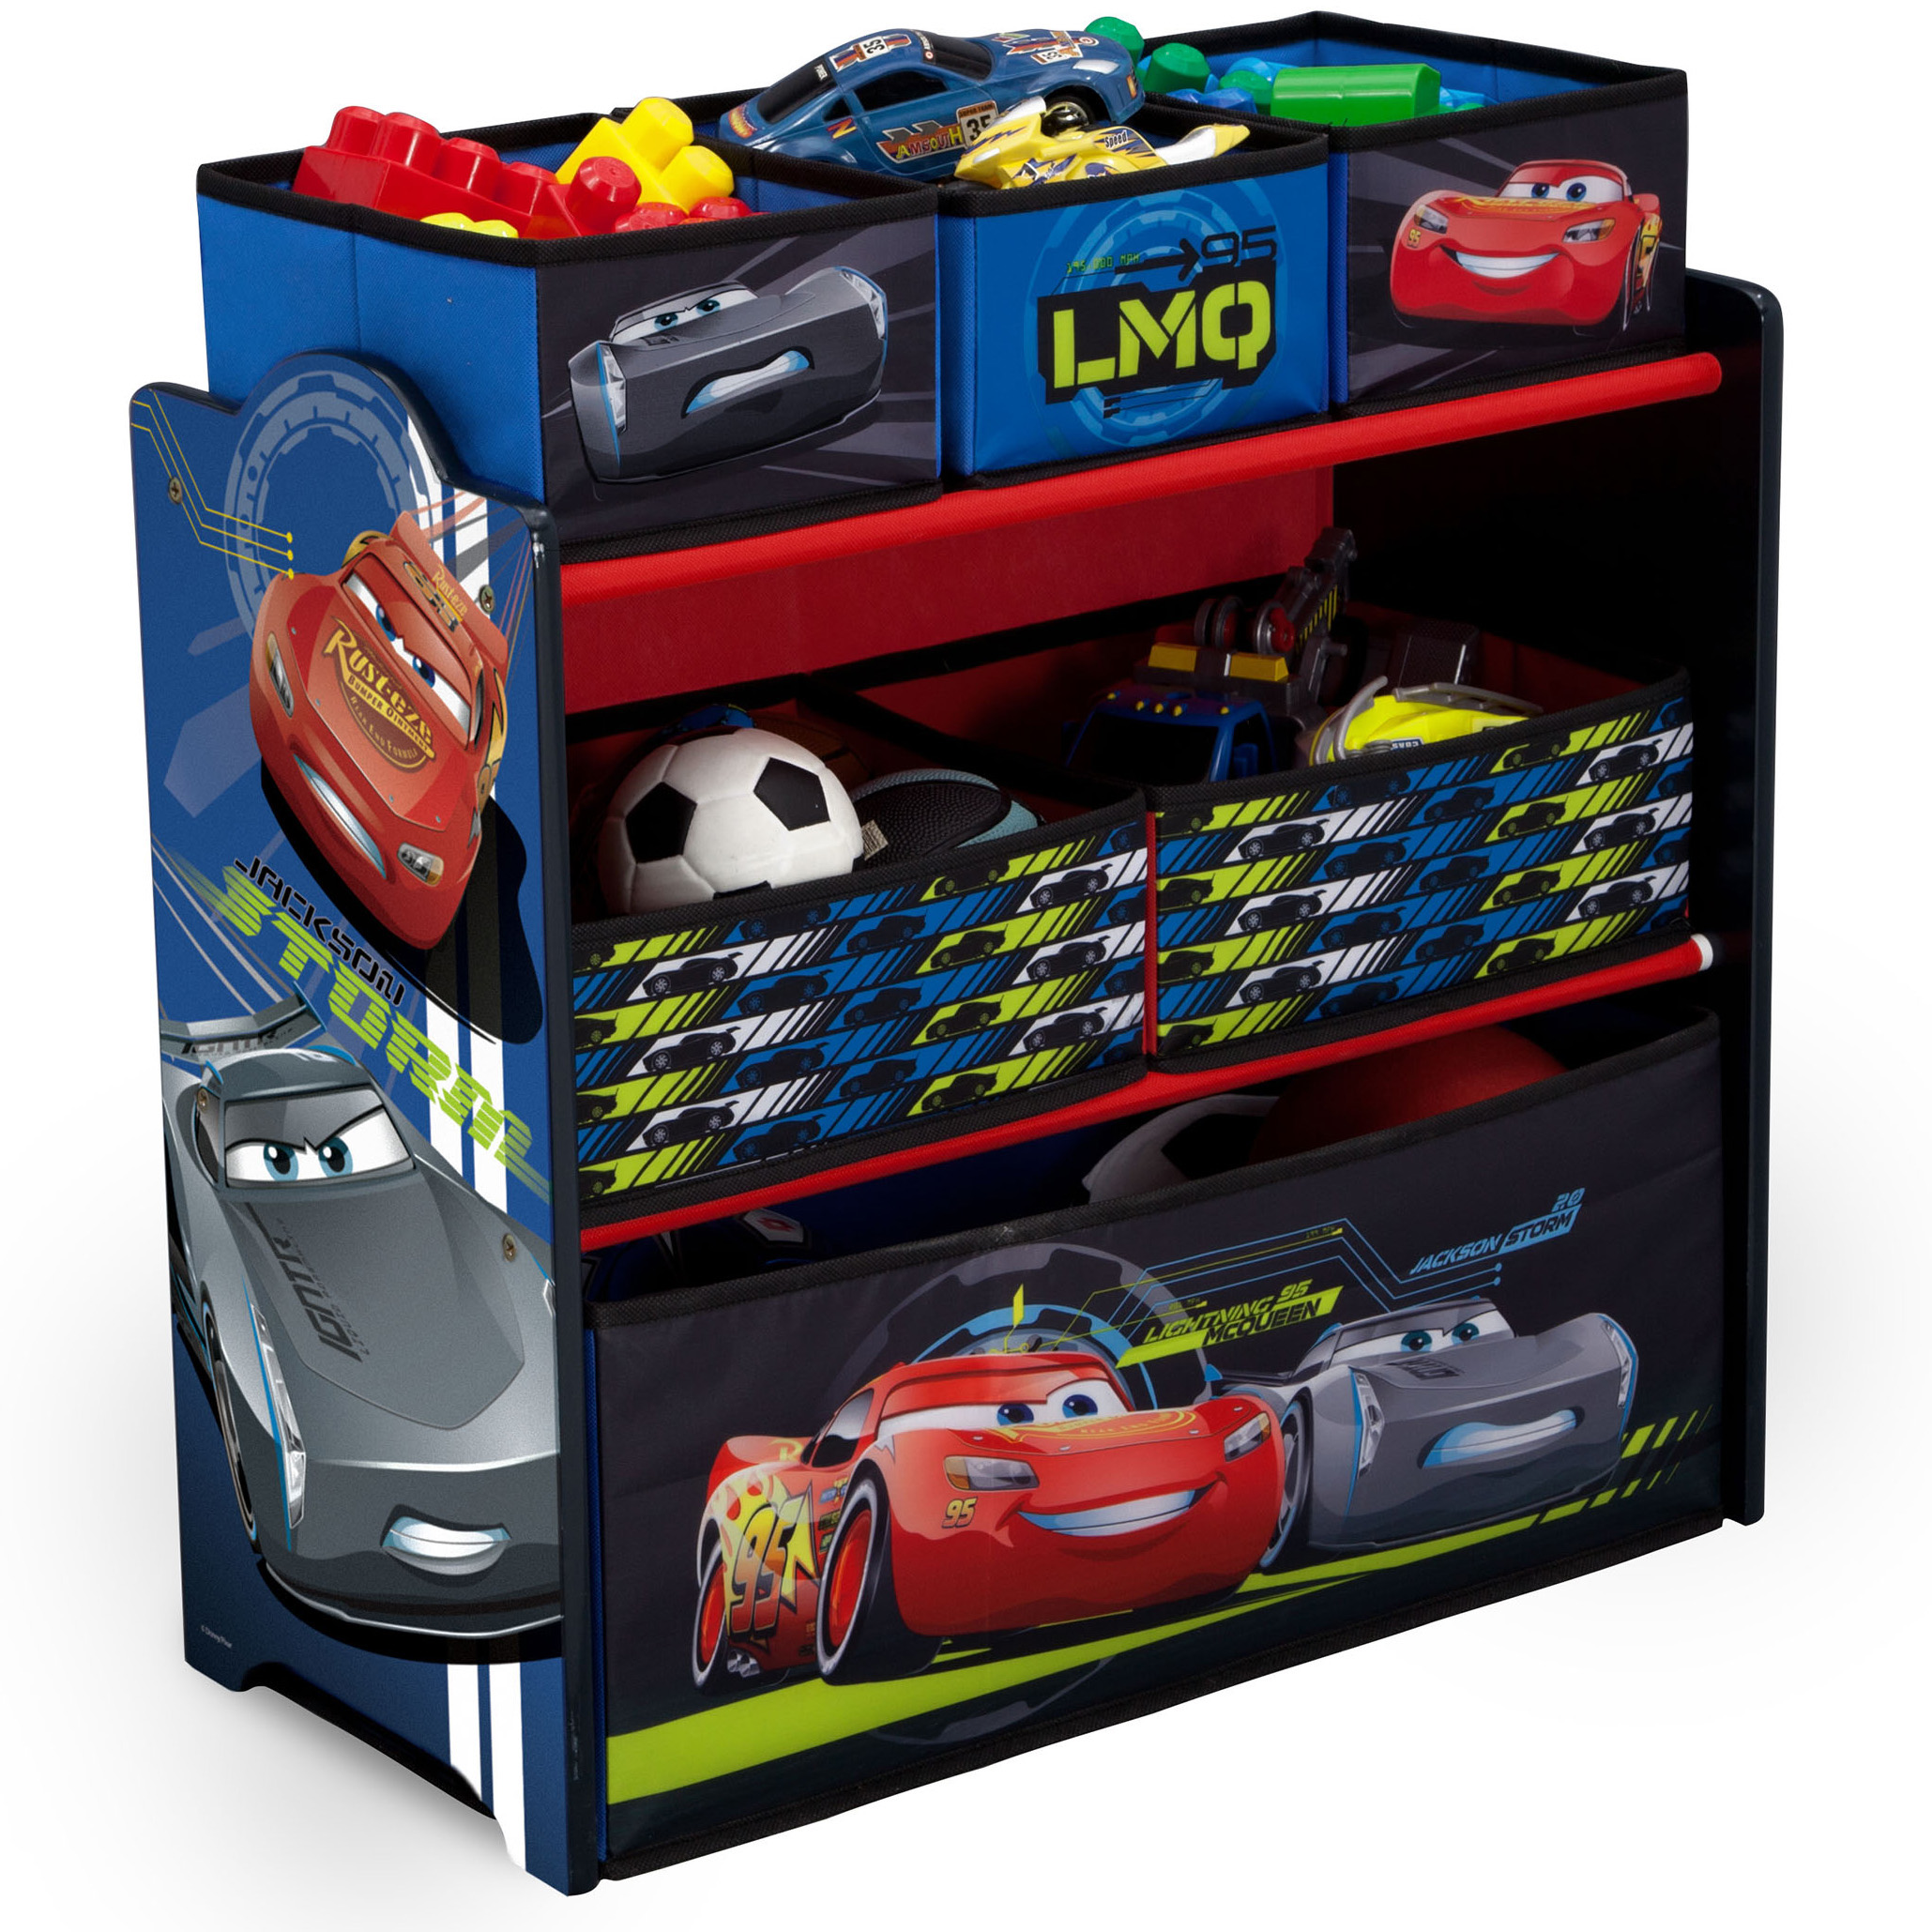 Disney Pixar Cars 6 Bin Design and Store Toy Organizer by Delta Children - Durable Engineered Wood, Solid Wood and Fabric Construction, Black/Multi Color - image 1 of 12